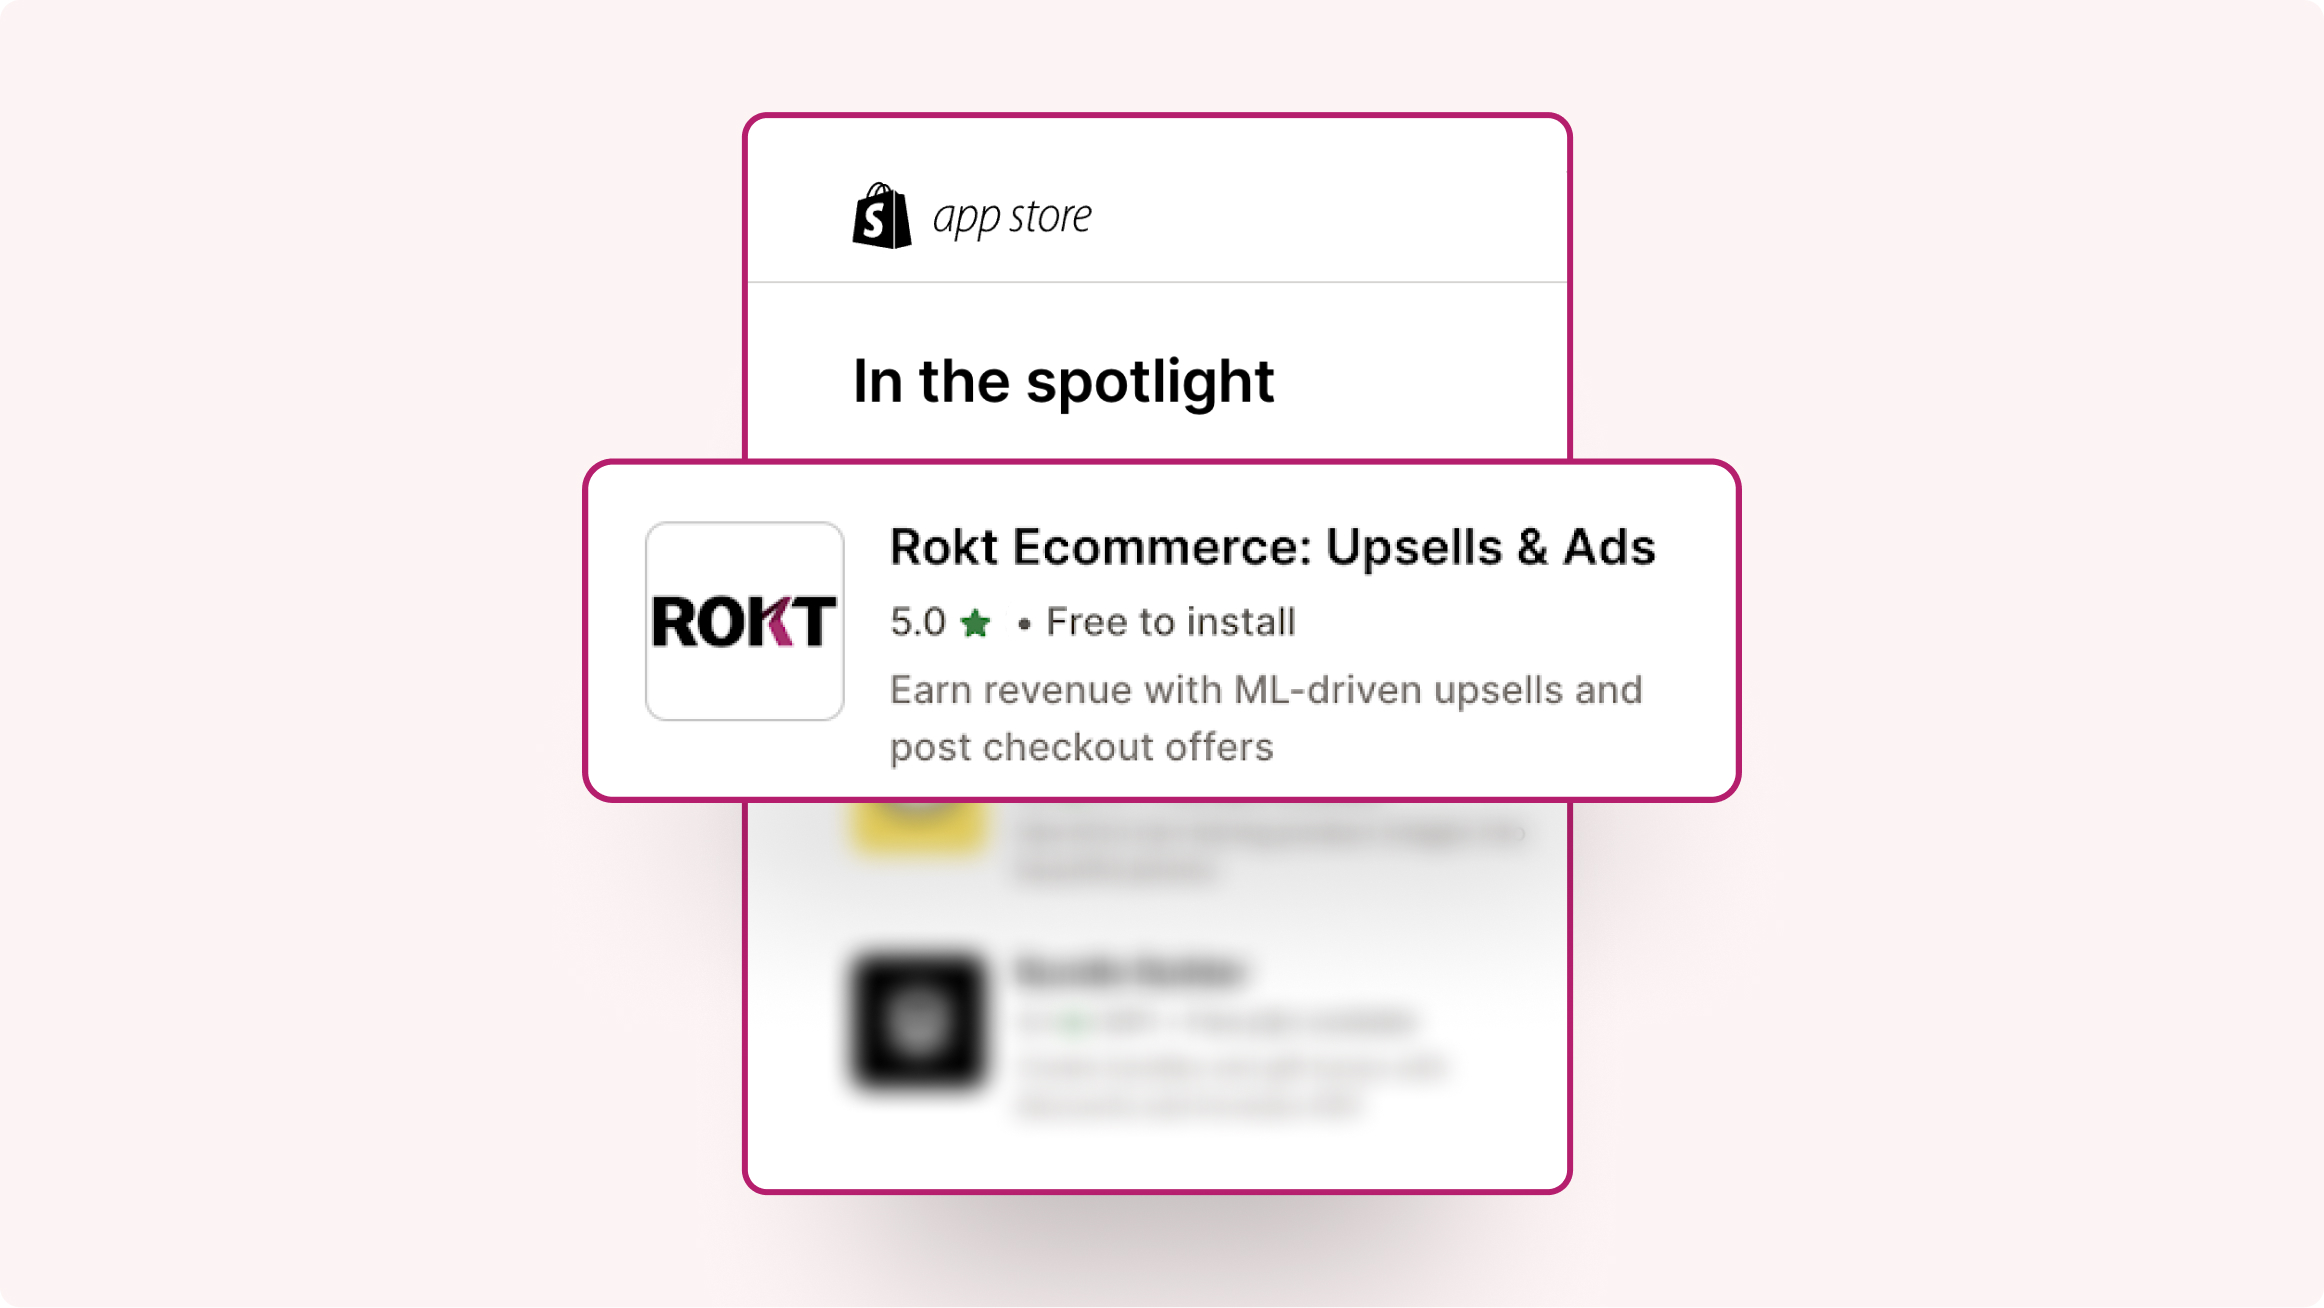 Boost revenue with personalized offers & upsells with the Rokt Ecommerce app on Shopify